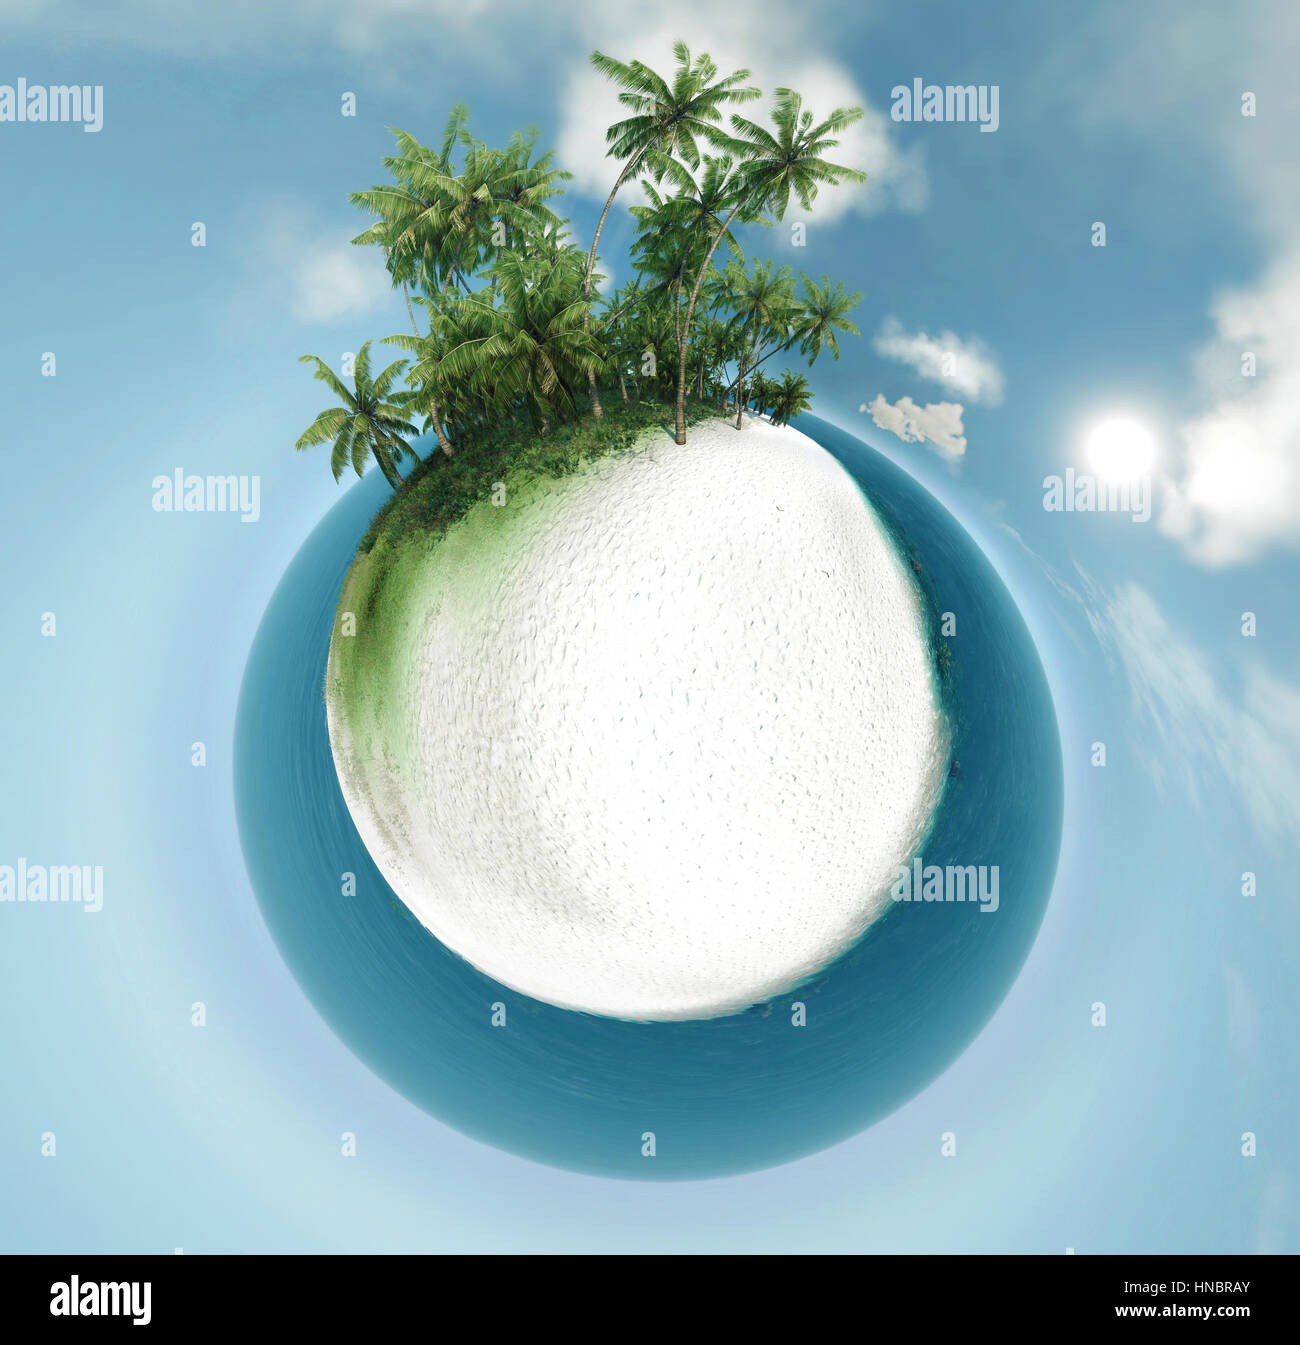 small planet, ocean, tropical island, palm trees 3D illustration Stock Photo